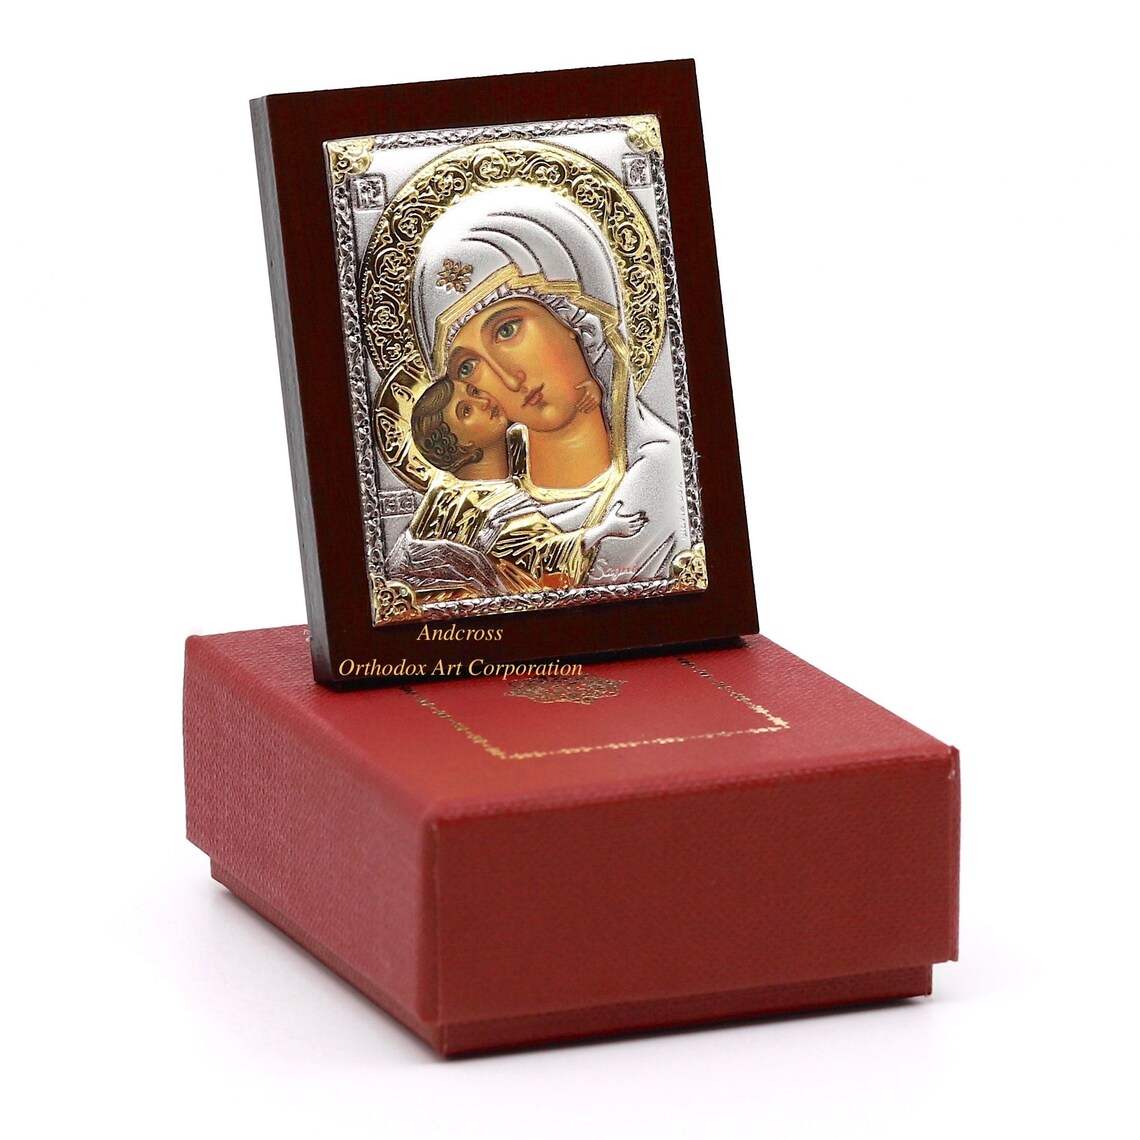 Silver Plated .999 Orthodox Icon Mother Of God Vladimir. ( 6.4cm X 5cm ). B301|Silver Plated .999 Orthodox Icon Mother Of God Vladimir. ( 6.4cm X 5cm ). B301|Silver Plated .999 Orthodox Icon Mother Of God Vladimir. ( 6.4cm X 5cm ). B301|Silver Plated .999 Orthodox Icon Mother Of God Vladimir. ( 6.4cm X 5cm ). B301